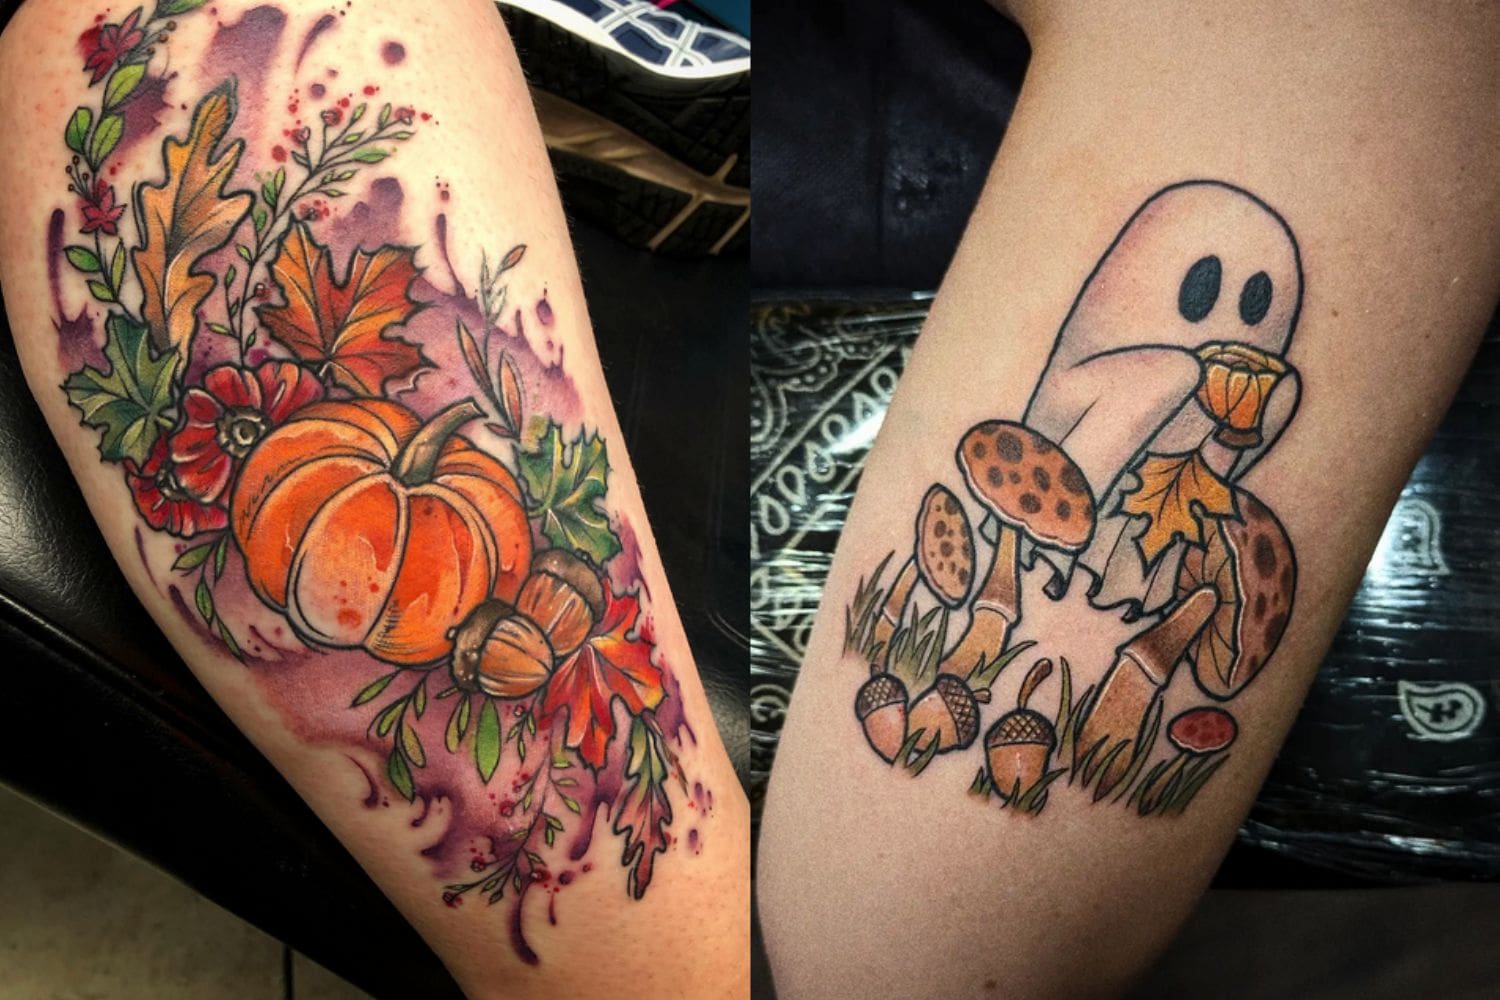 22 Subtle Pokémon Tattoos We Would Totally Get